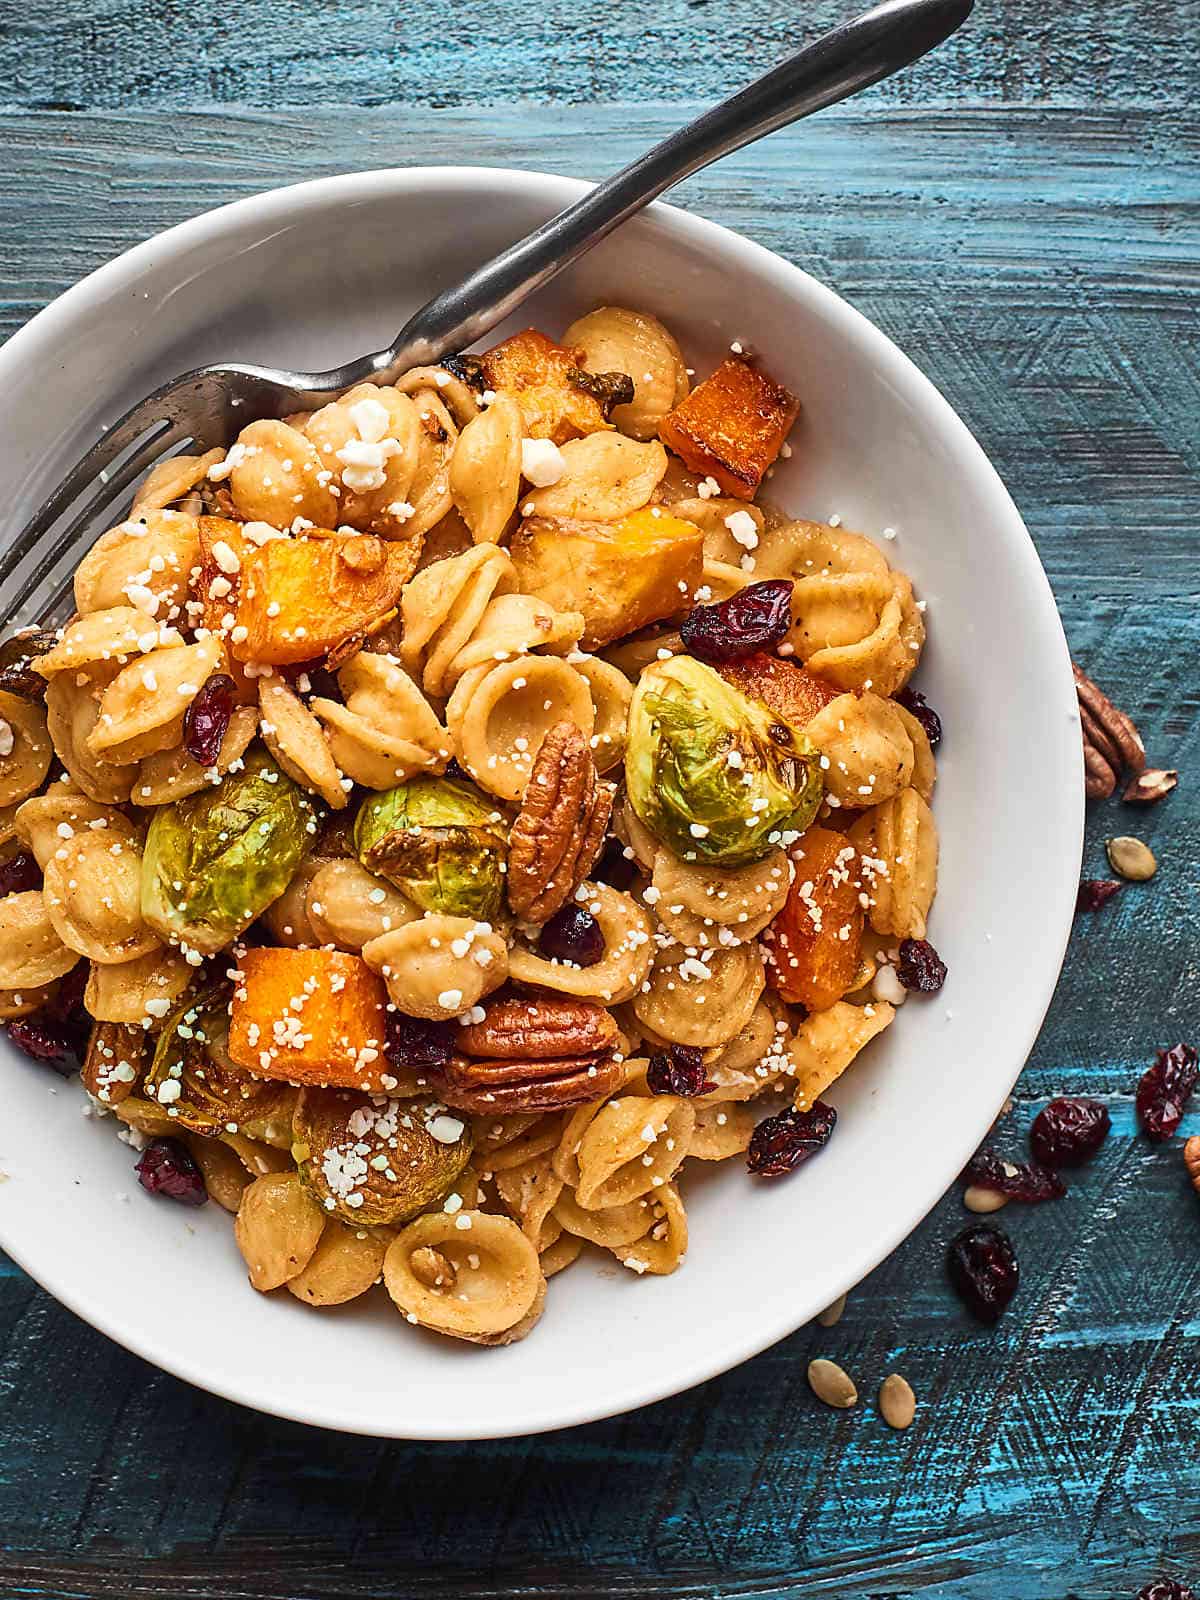 Roasted Fall Vegetable Pasta Recipe - Squash, Brussels Sprout, Goat Cheese